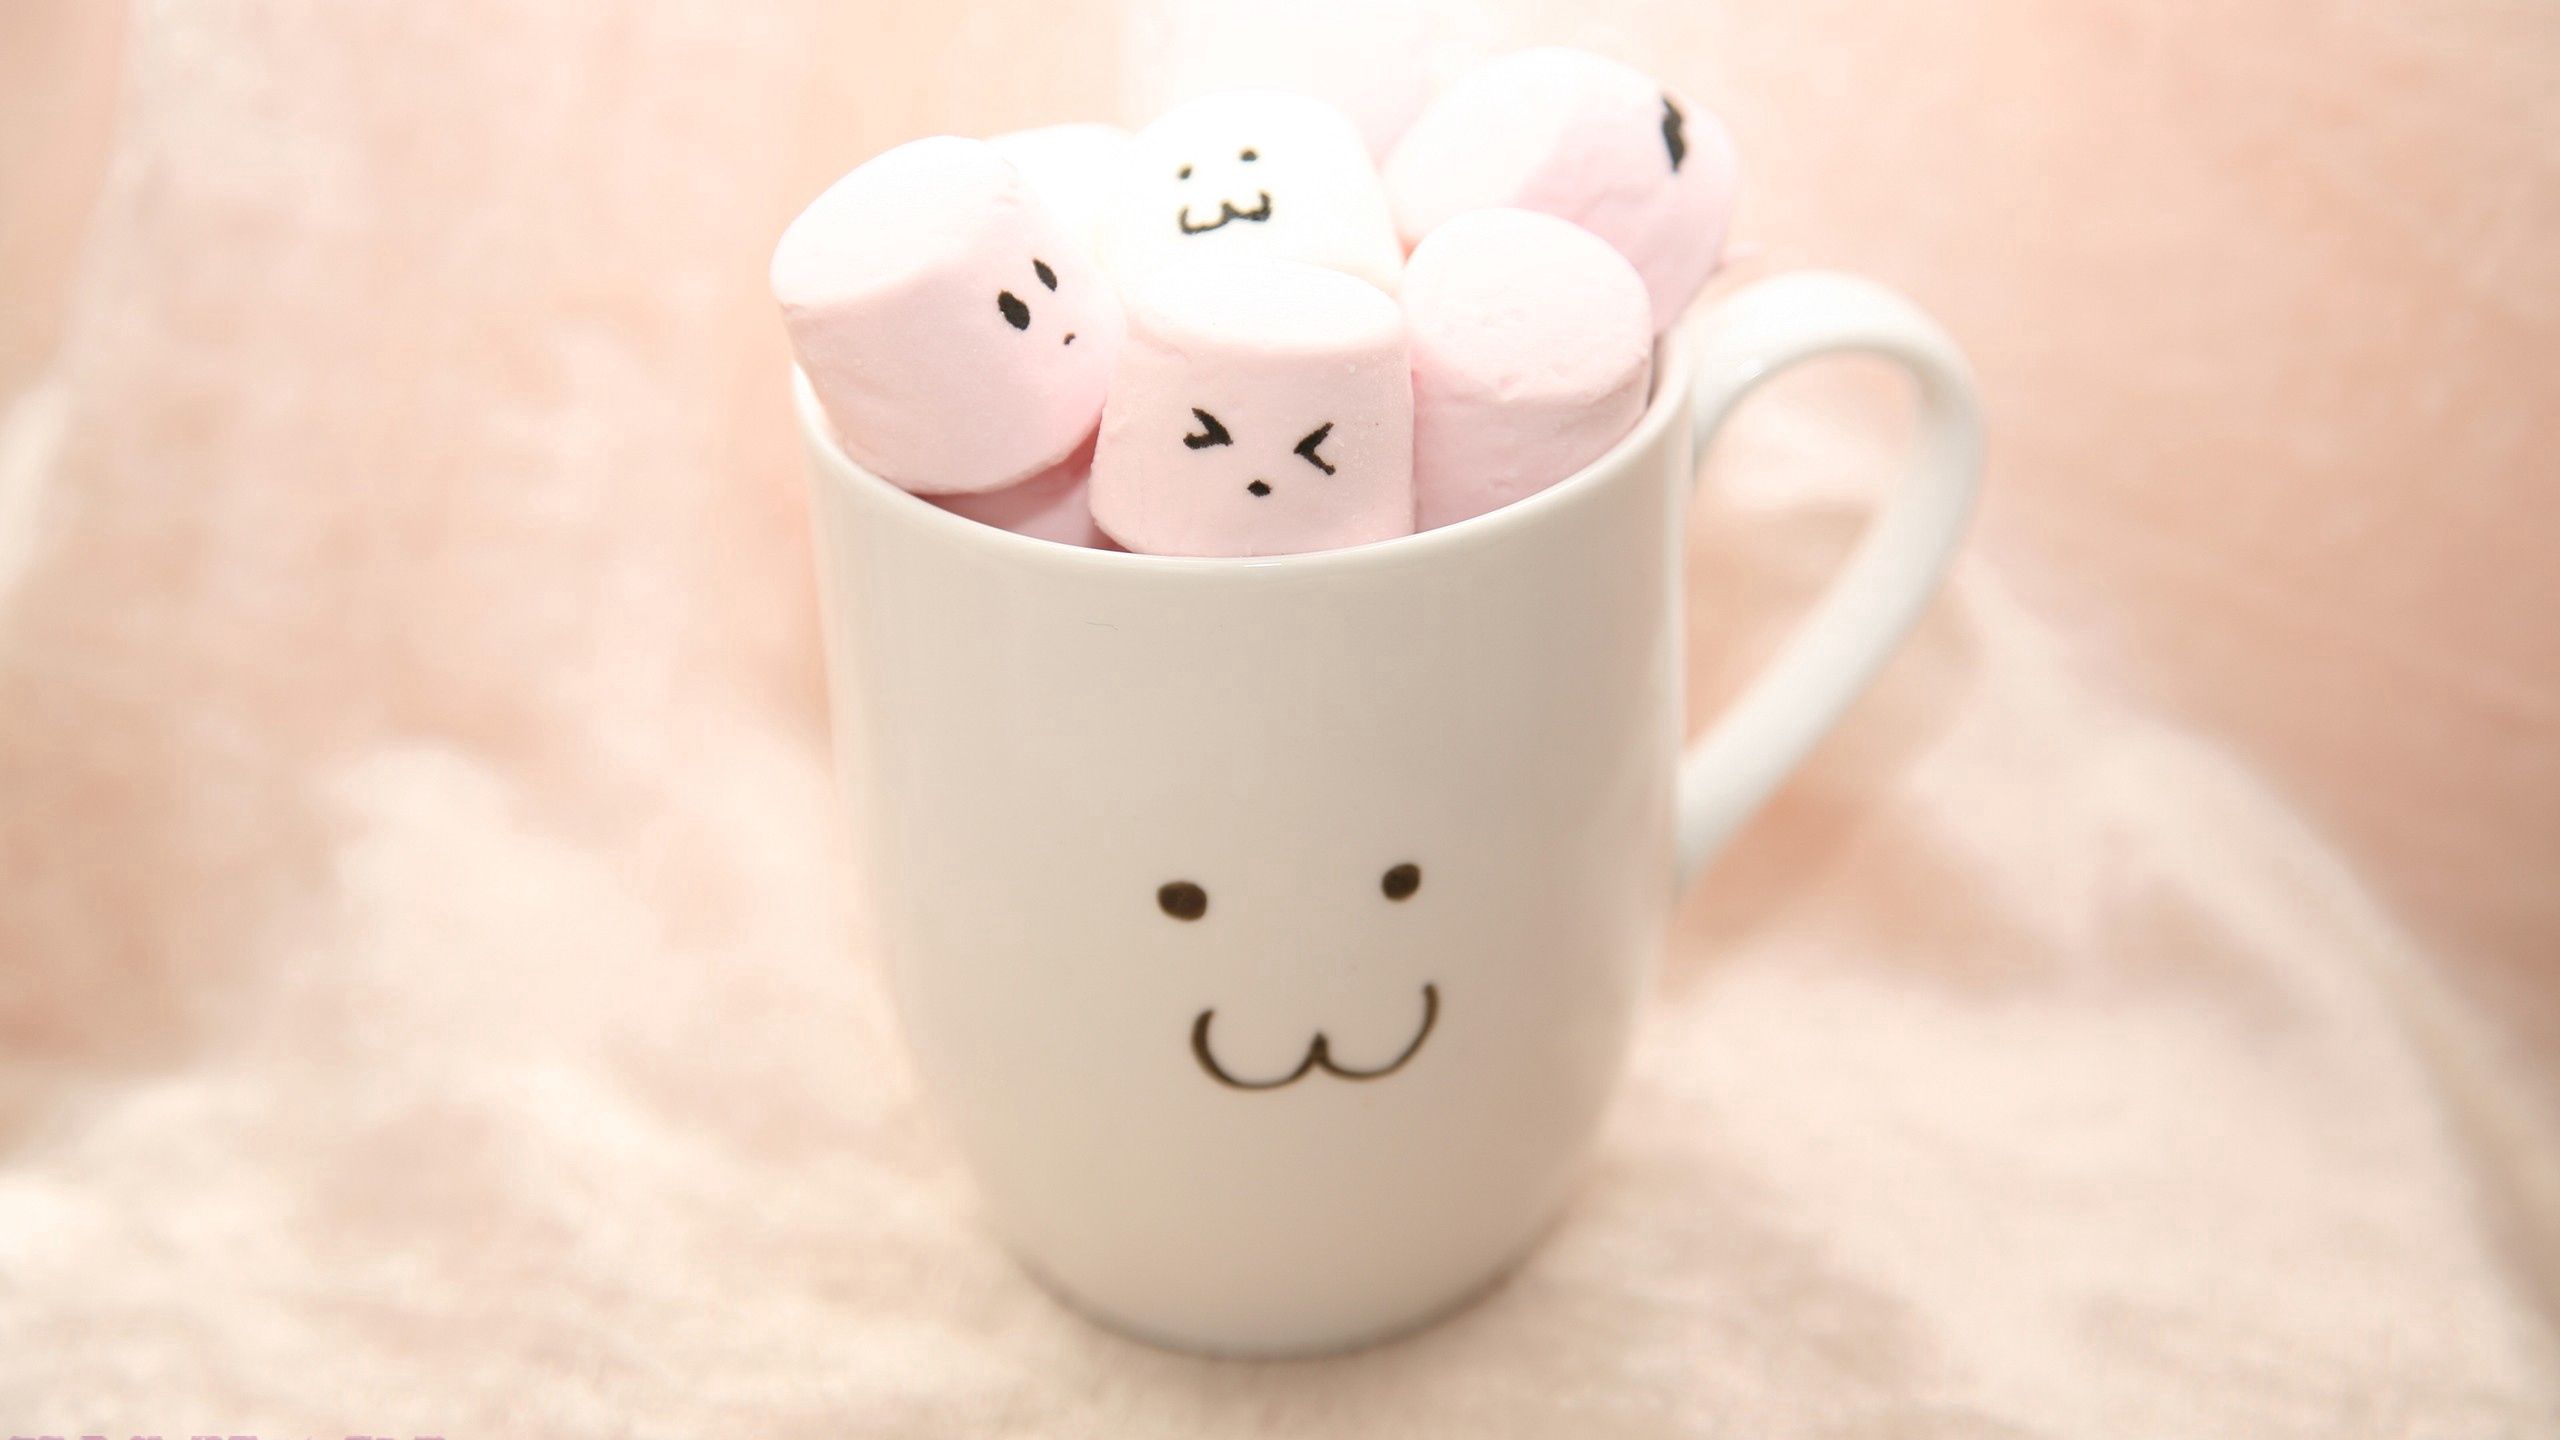 smiles, smilies, miscellanea, miscellaneous, cup, zephyr, marshmallow wallpapers for tablet